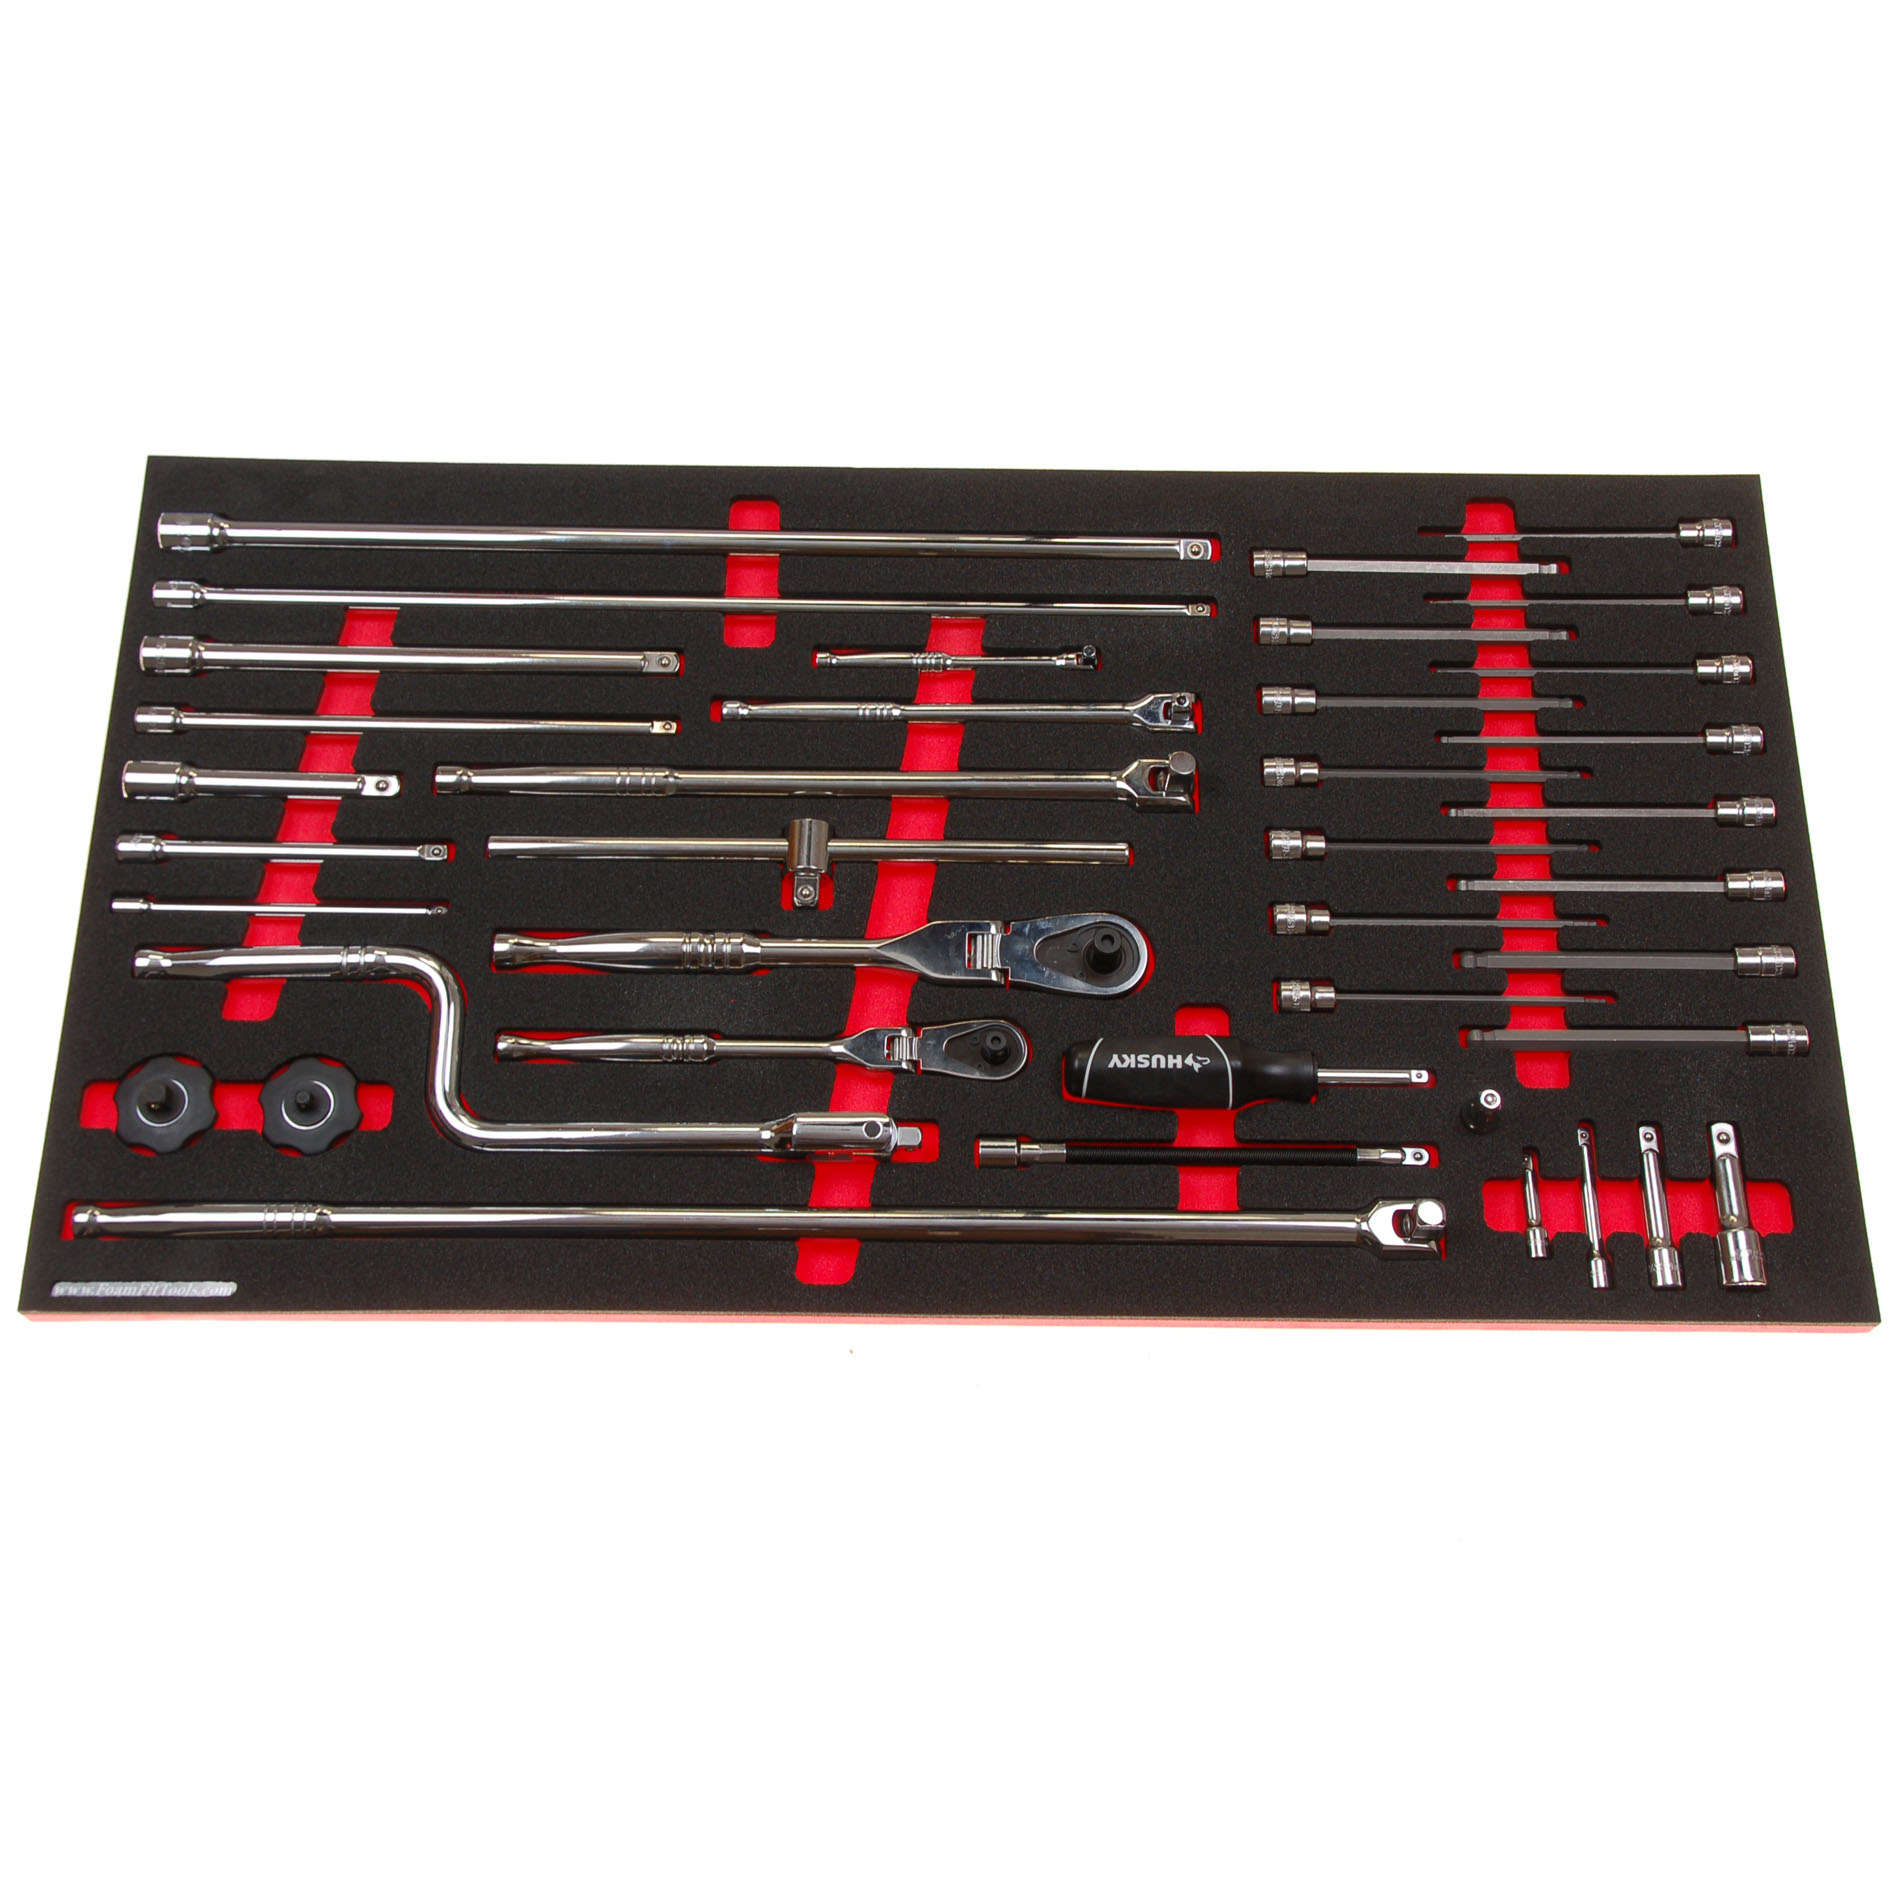  Lippert Boat Tool Kit, 435 Piece Tool Set for Boat